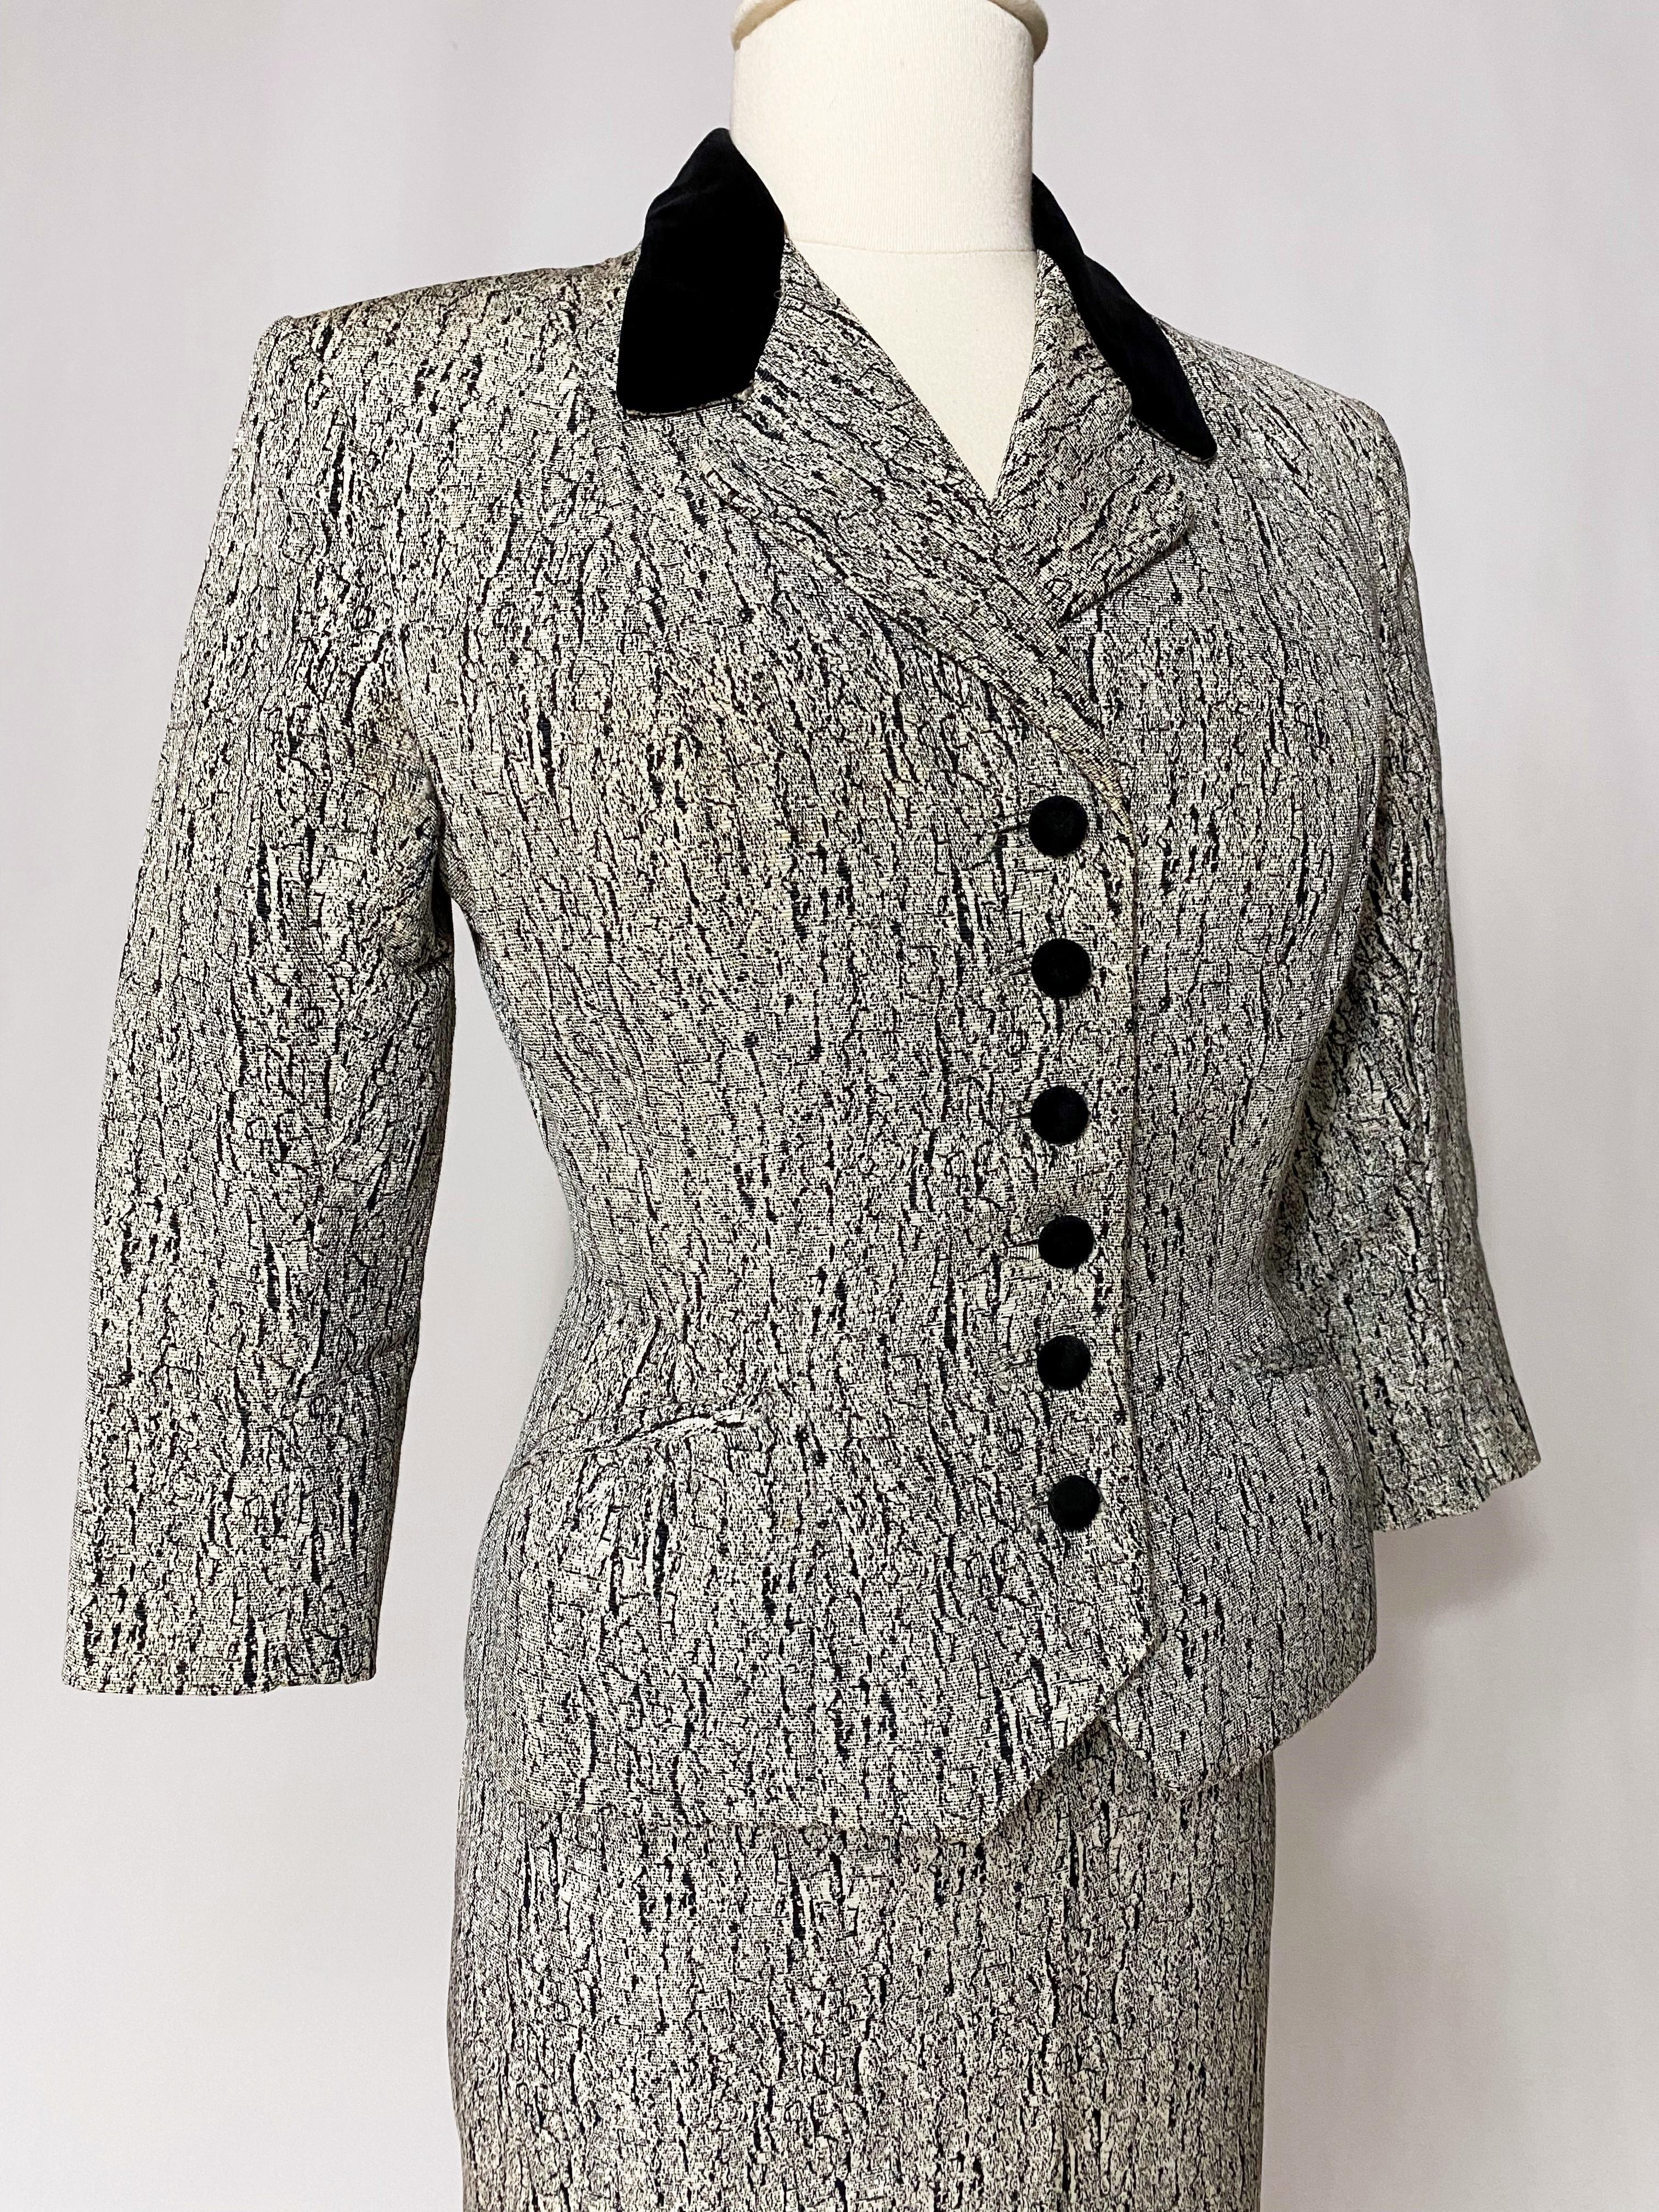 A Couture Bar skirt suit in marbled printed silk faille - France Circa 1947-1950 In Good Condition For Sale In Toulon, FR